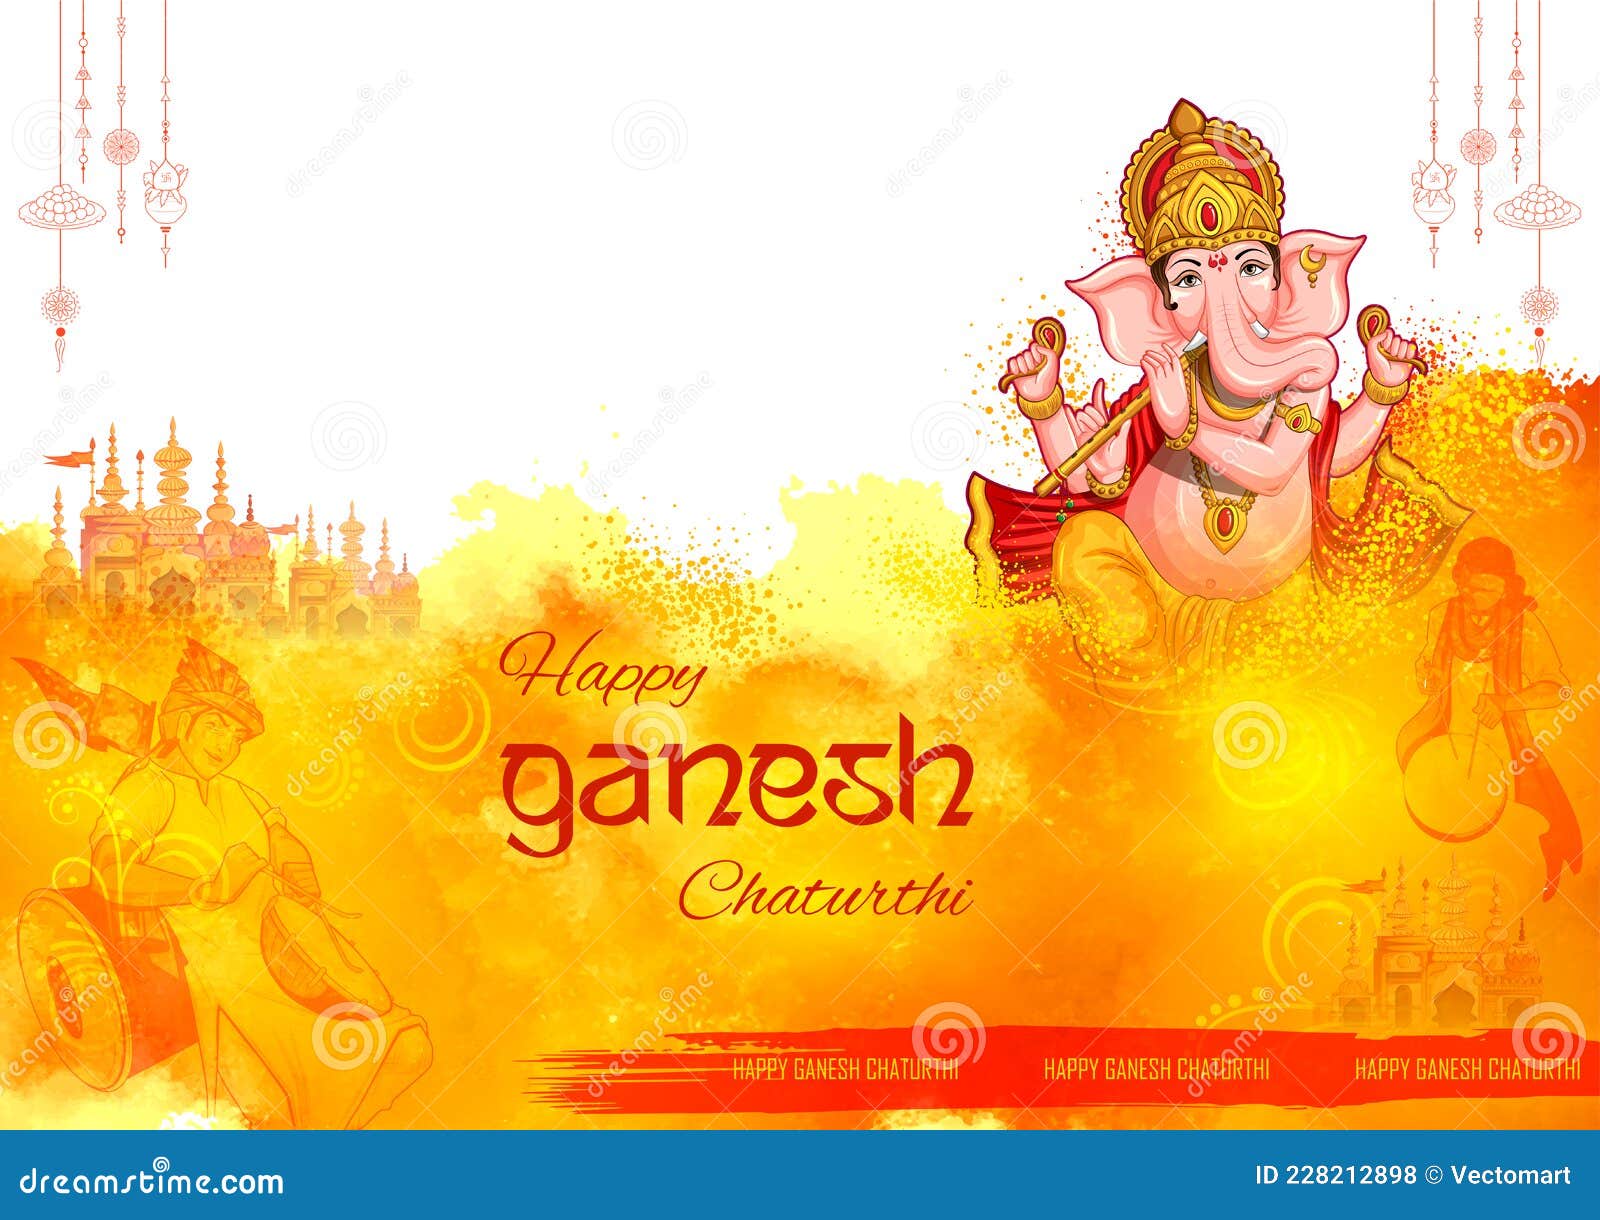 Lord Ganpati Background for Ganesh Chaturthi Festival of India with Message  Meaning My Lord Ganesha Stock Vector - Illustration of religion, indian:  228212898